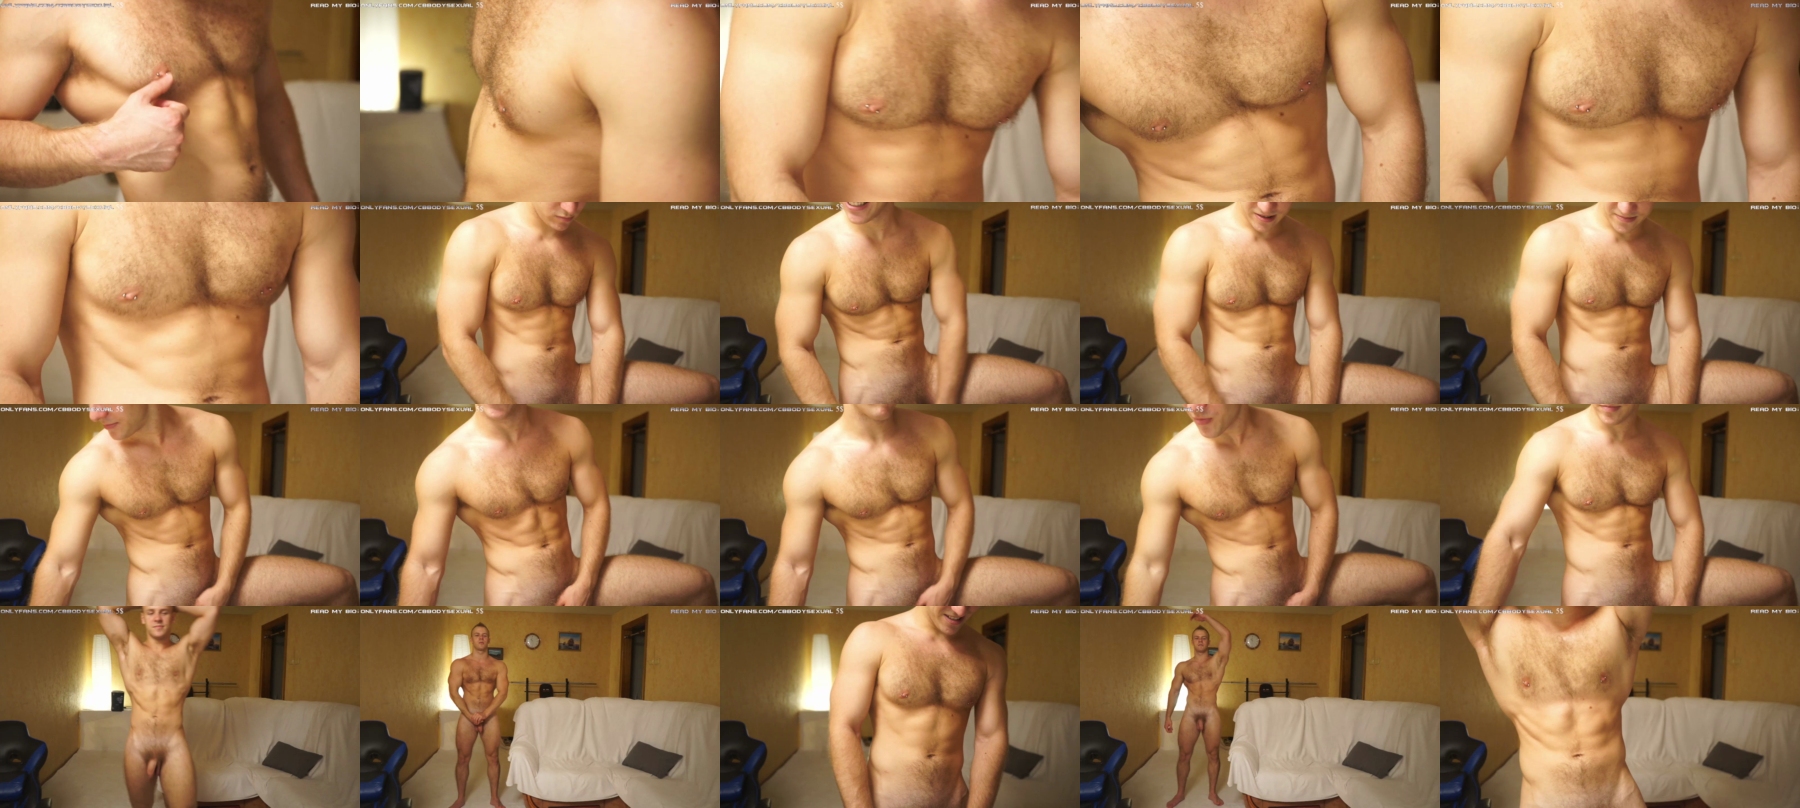 Bodysexual  30-07-2021 Male Naked